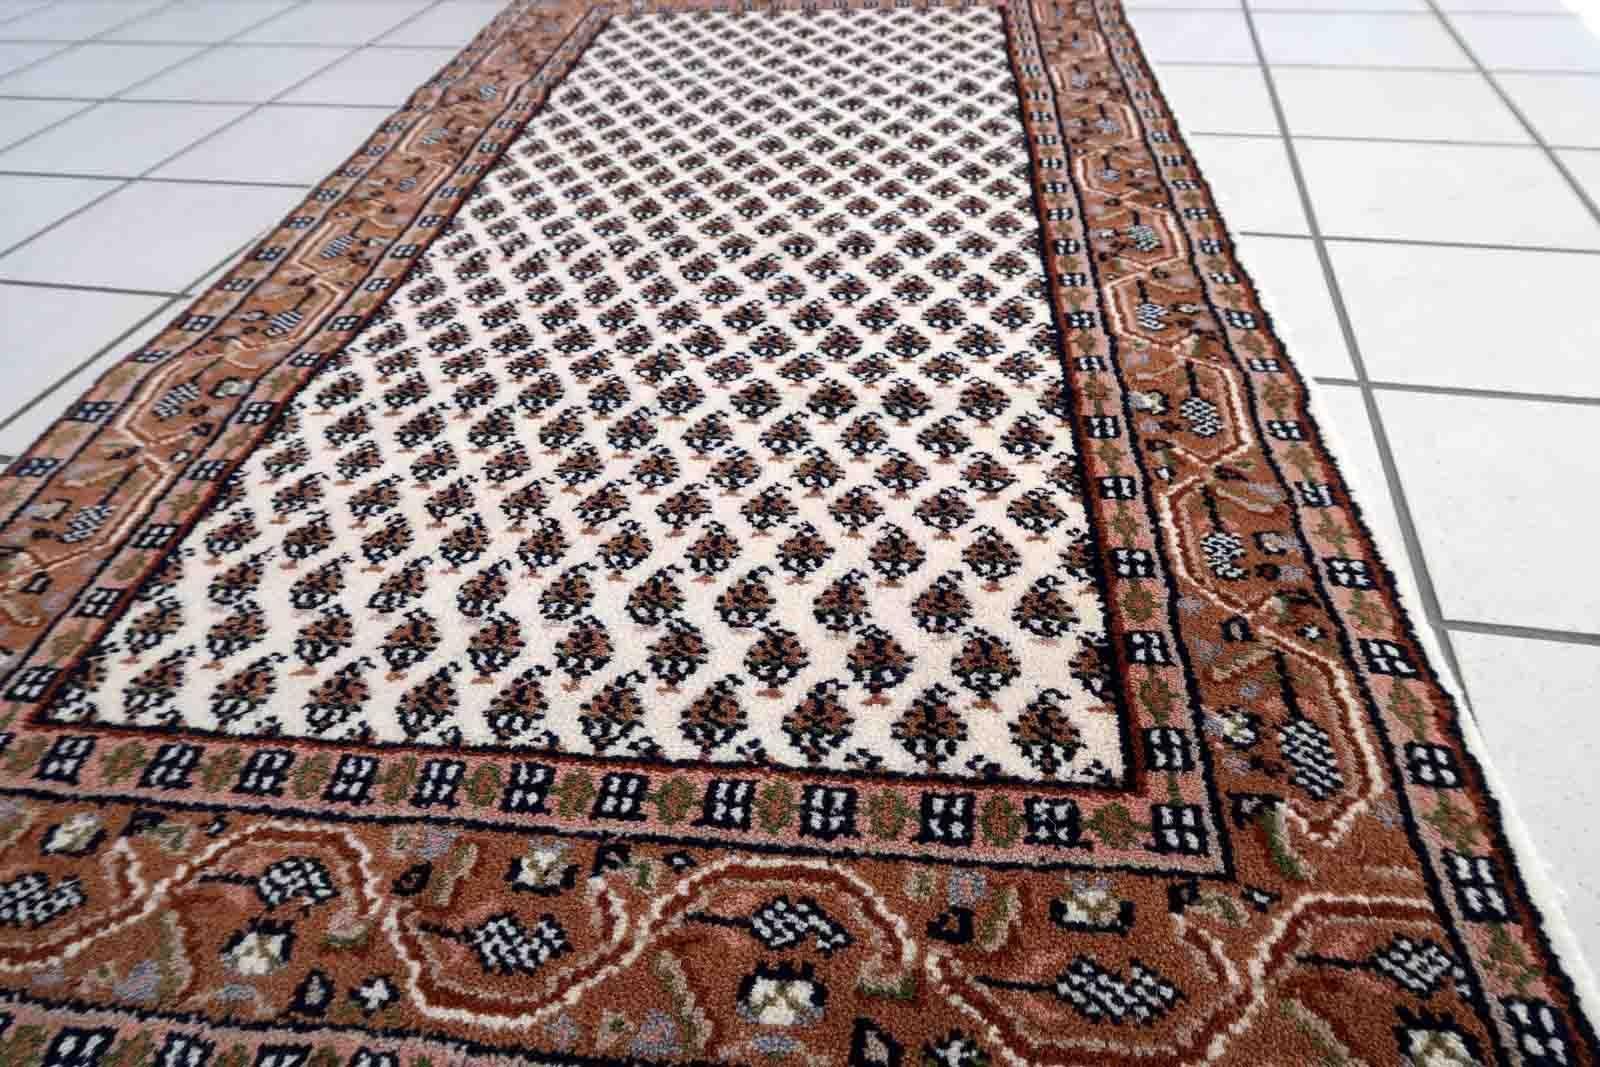 Handmade vintage Indian Seraband rug in original good condition. The rug has been made in traditional pattern, it is from circa1970s. 

-condition: original good,

-circa: 1970s,

-size: 2.4' x 4.5' (73cm x 140cm),

-material: